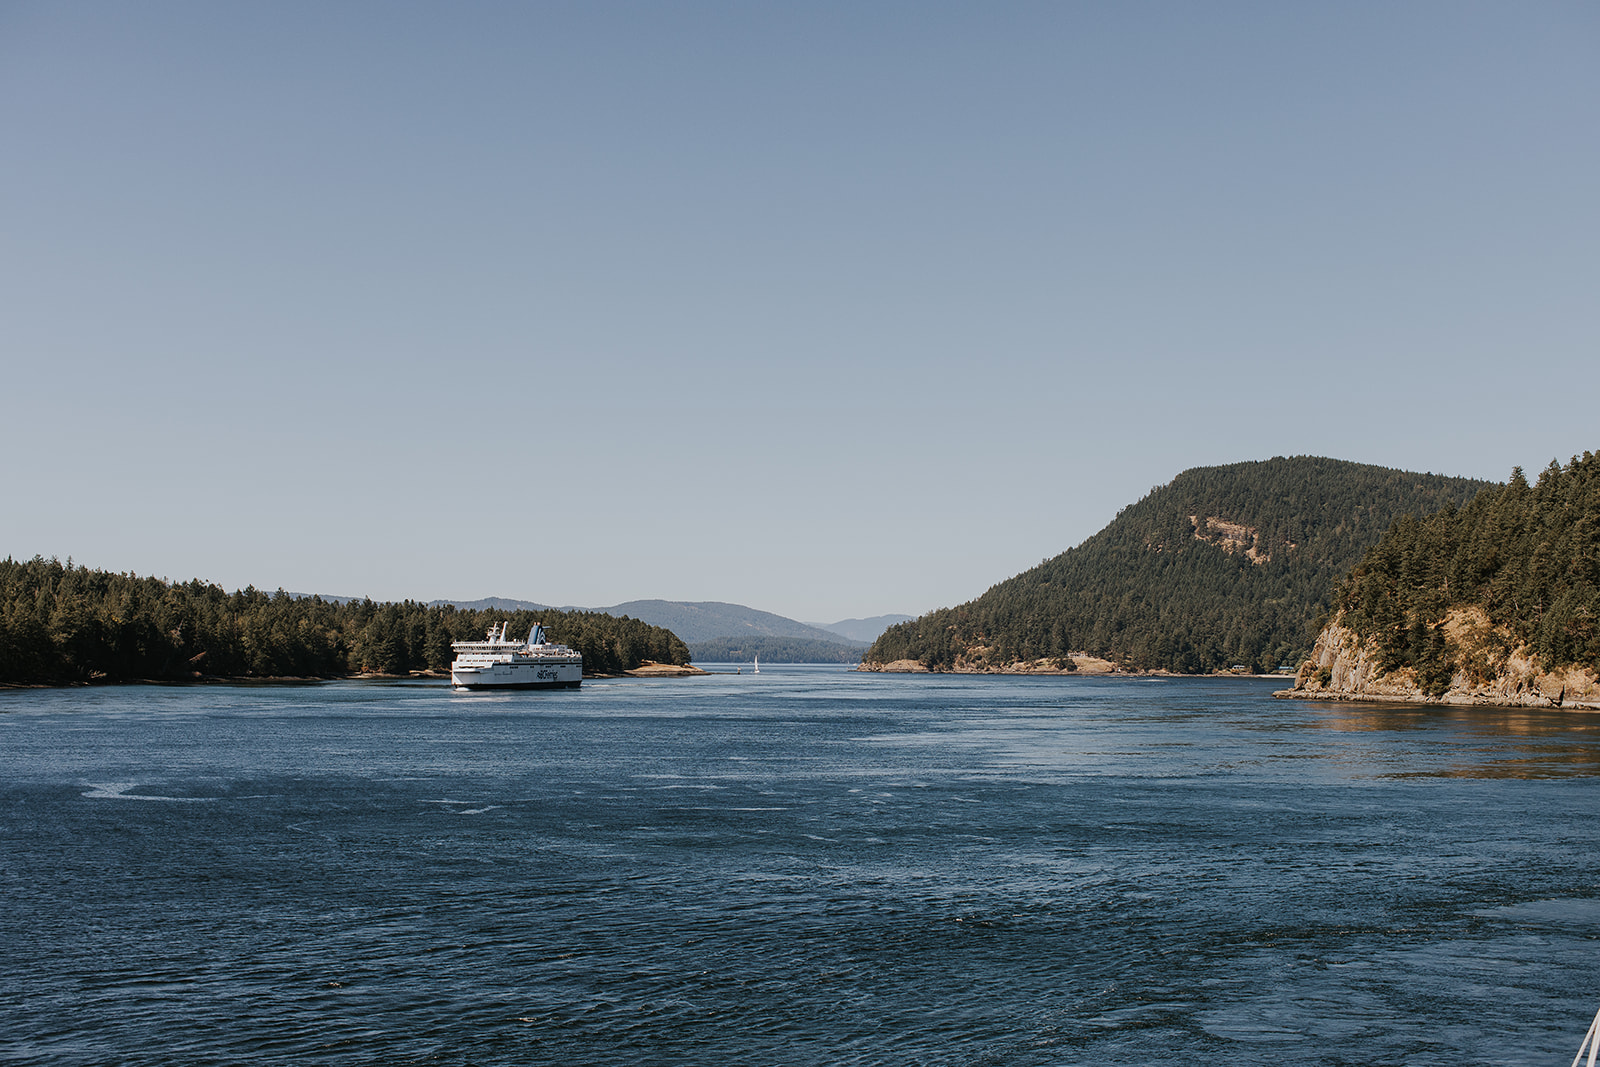 Ferry coming into Mayne Island, BC